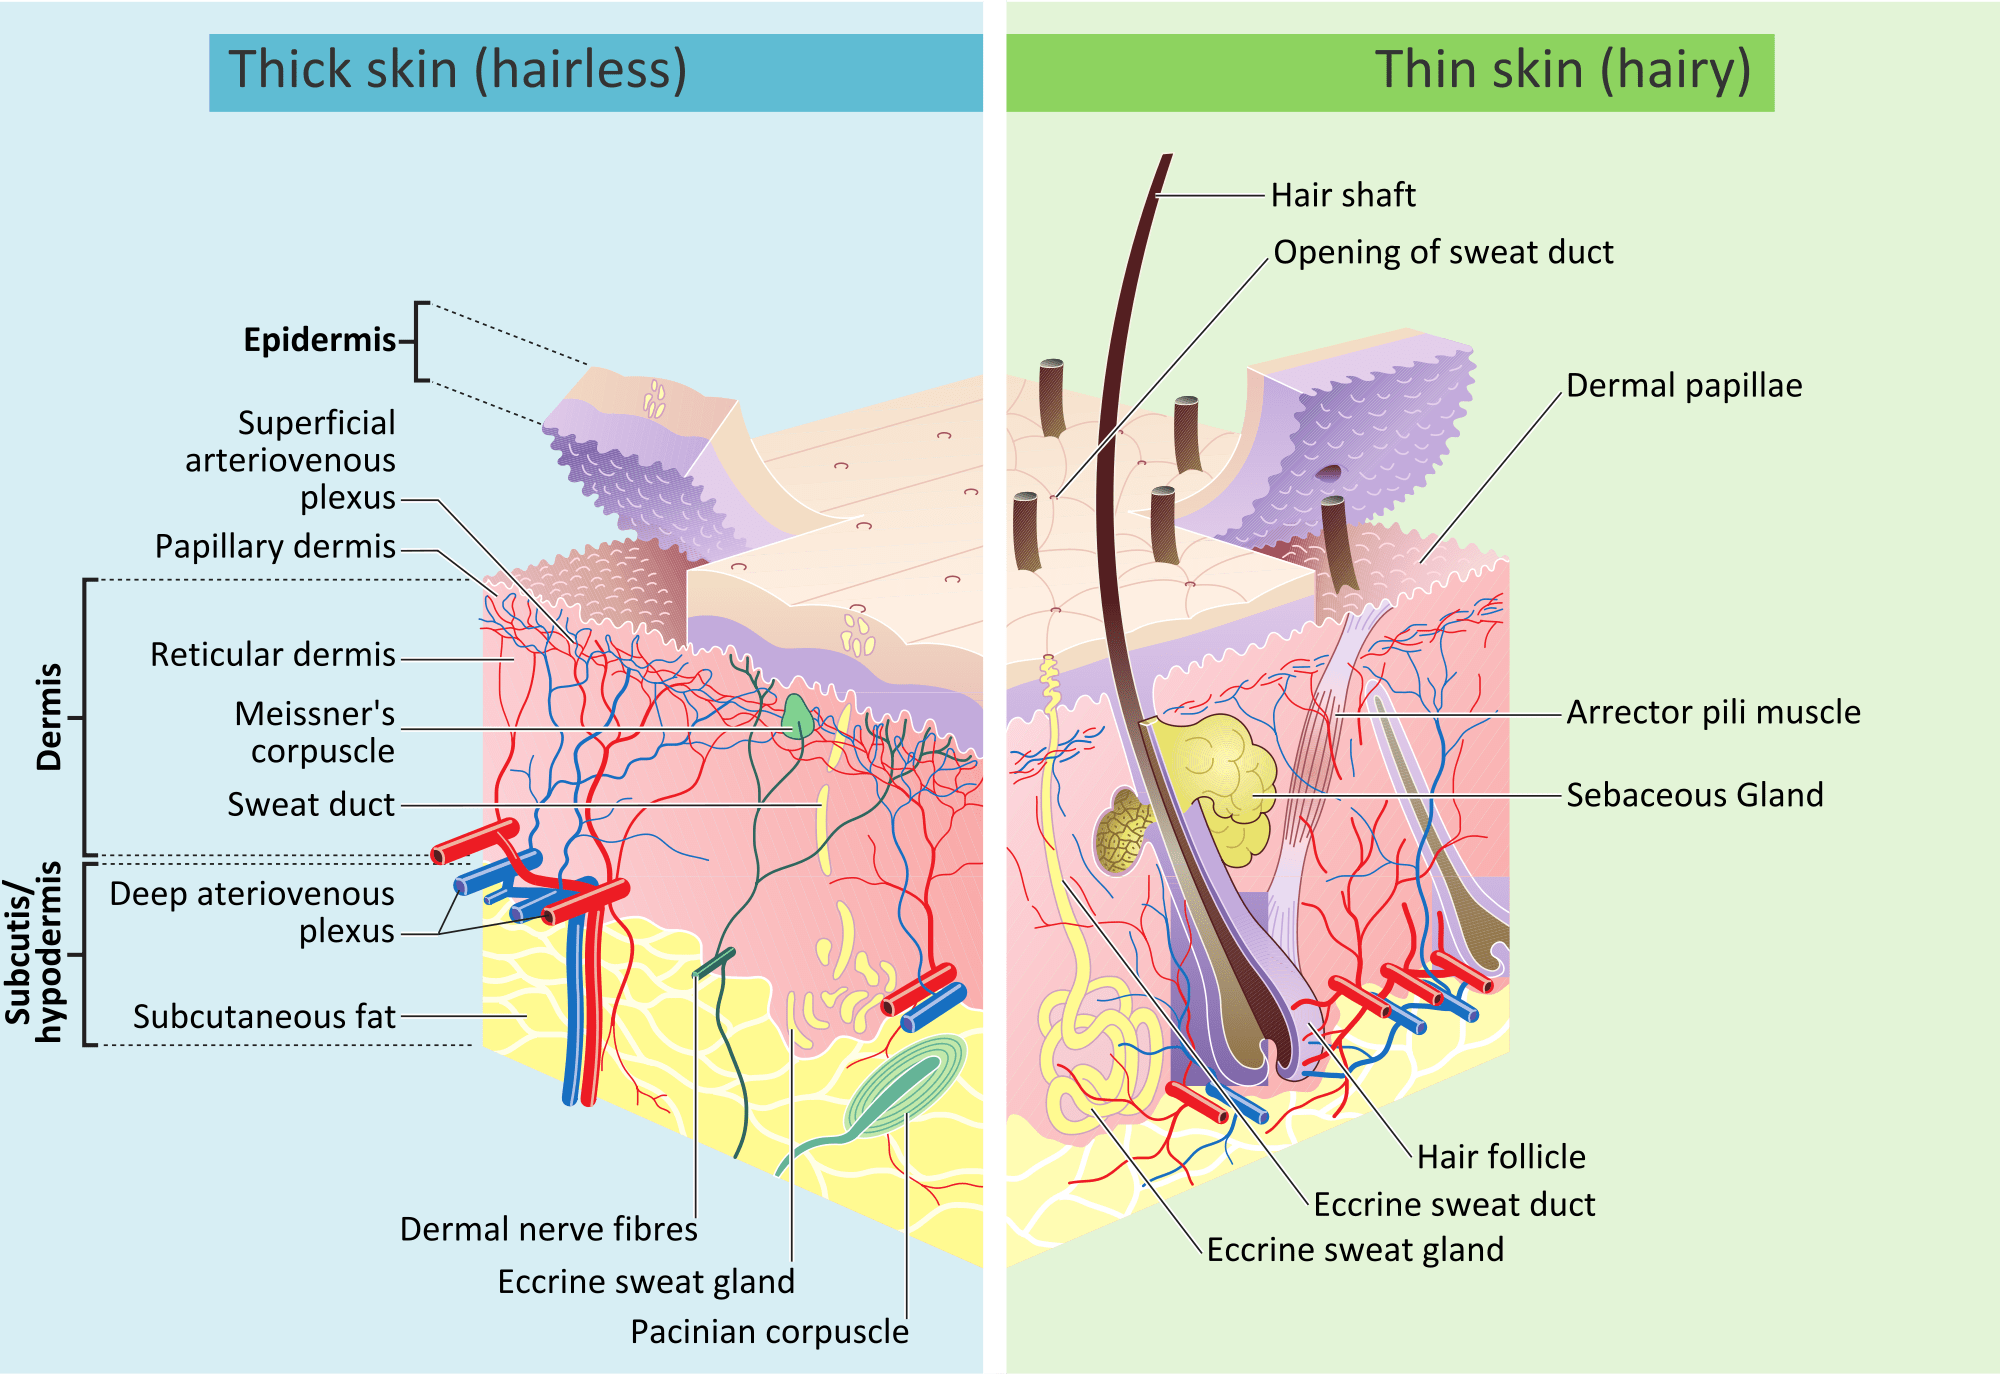 A simplified anatomical diagram of the skin, showing the the location of the eccrine sweat glands, as well as the exterior pores.